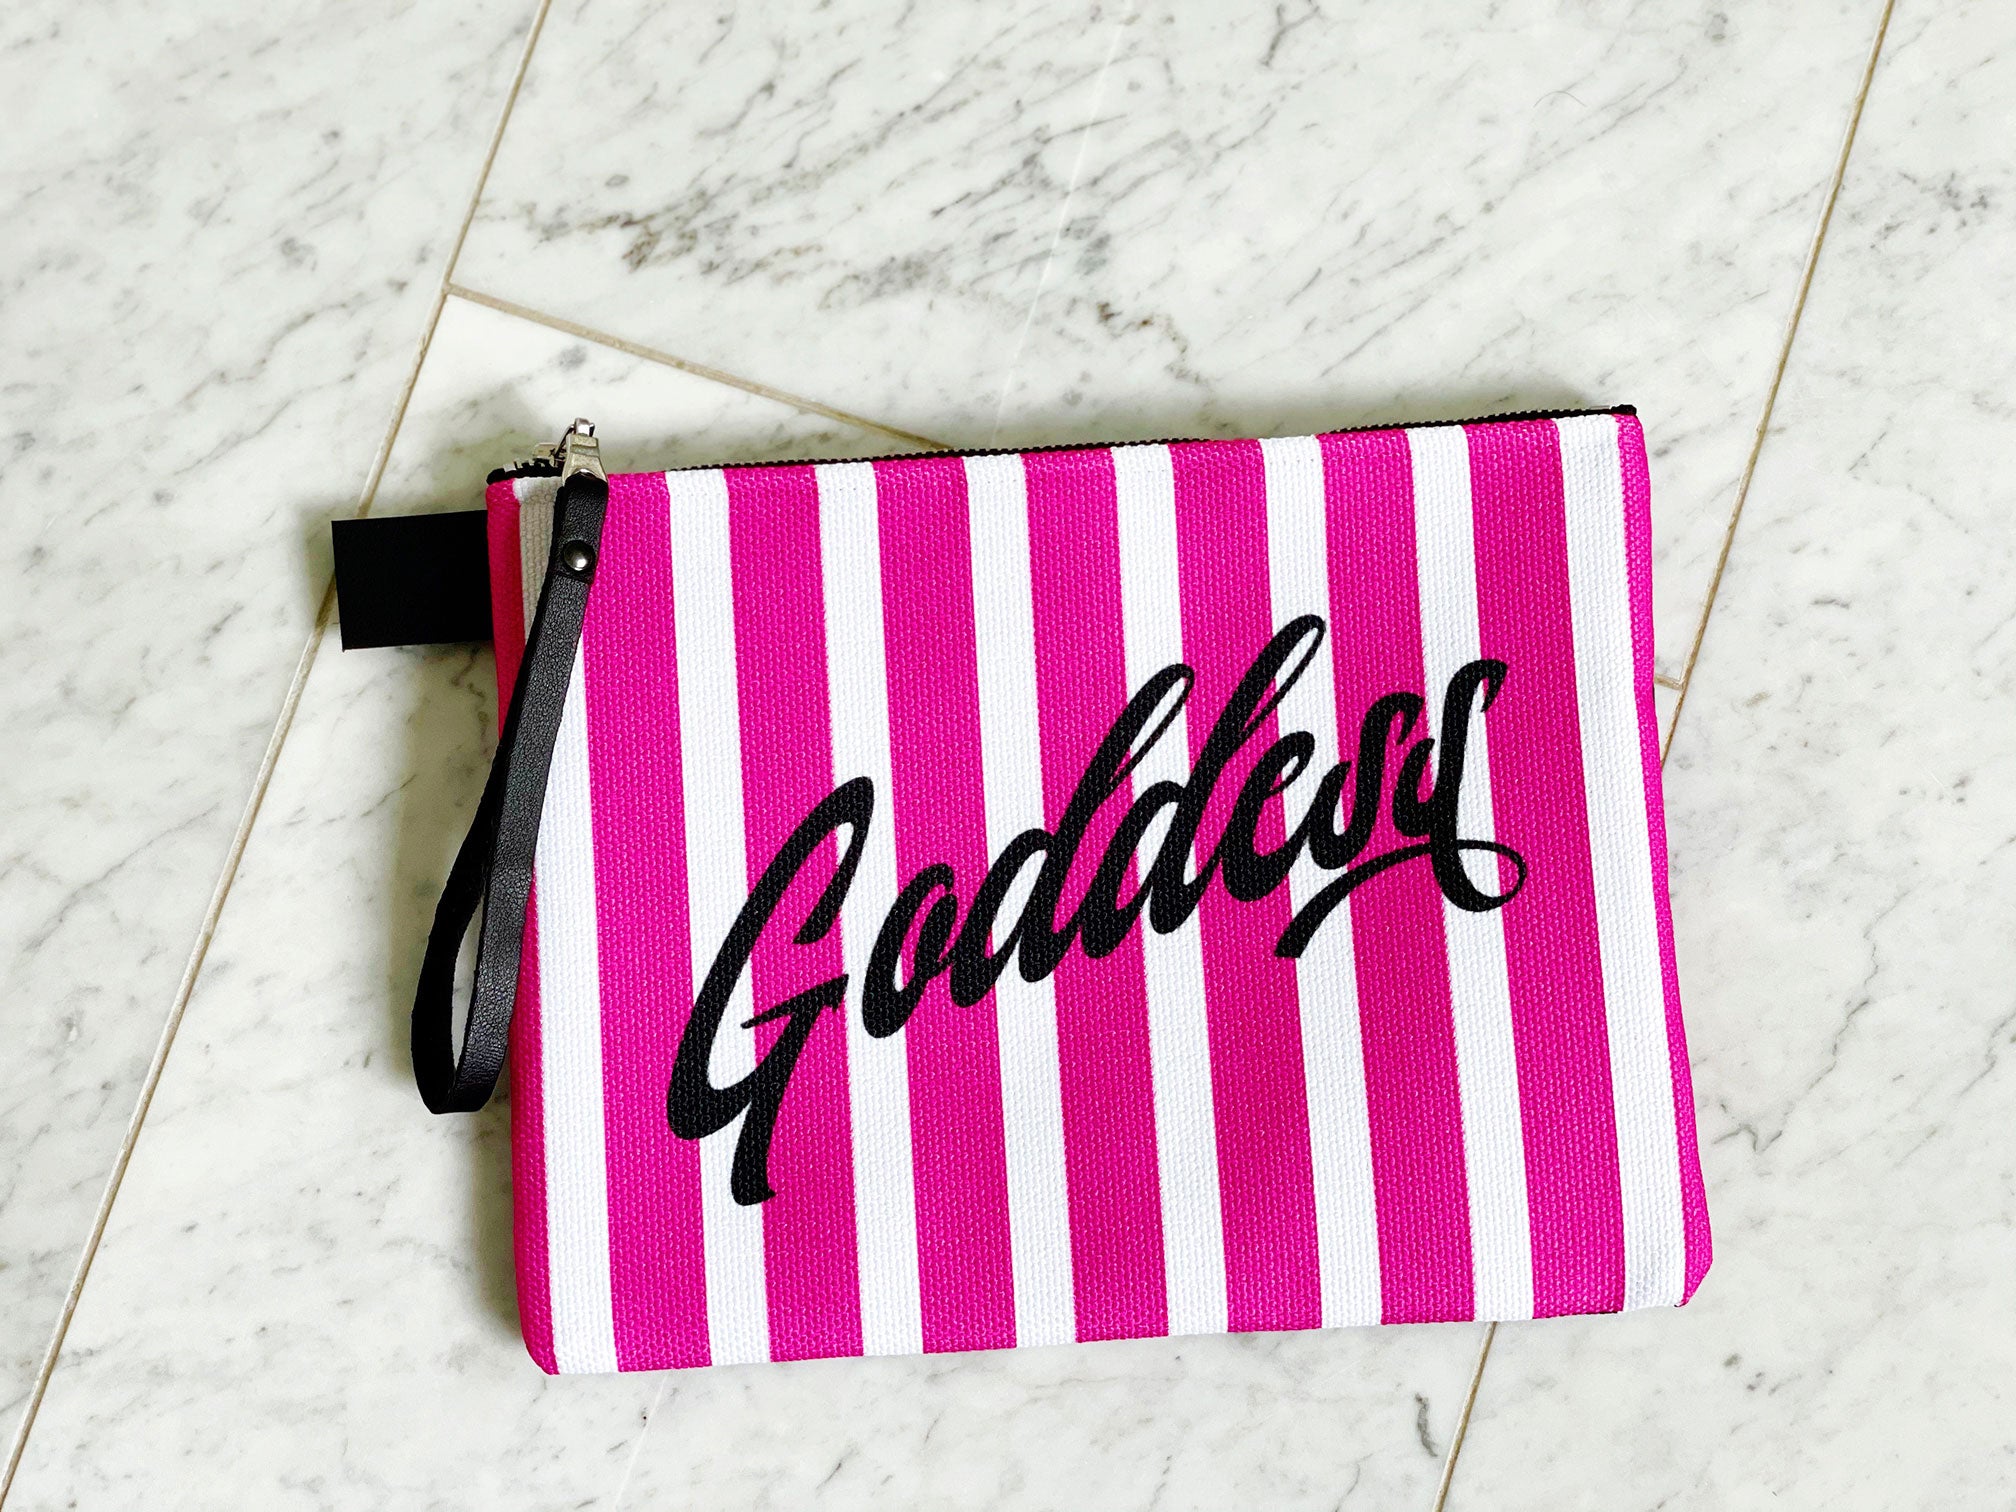 fully lined 10" zipper pouch in pink and black stripes with the word Goddess in script